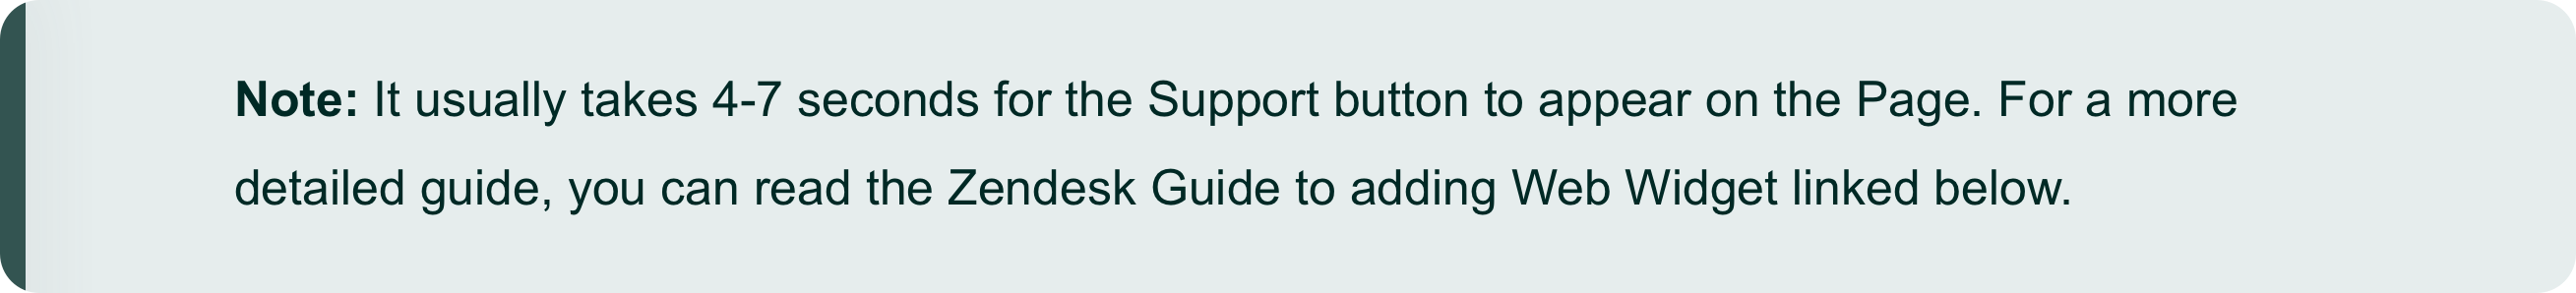 Zendesk_Guide_and_Support_on_Pages_4.png